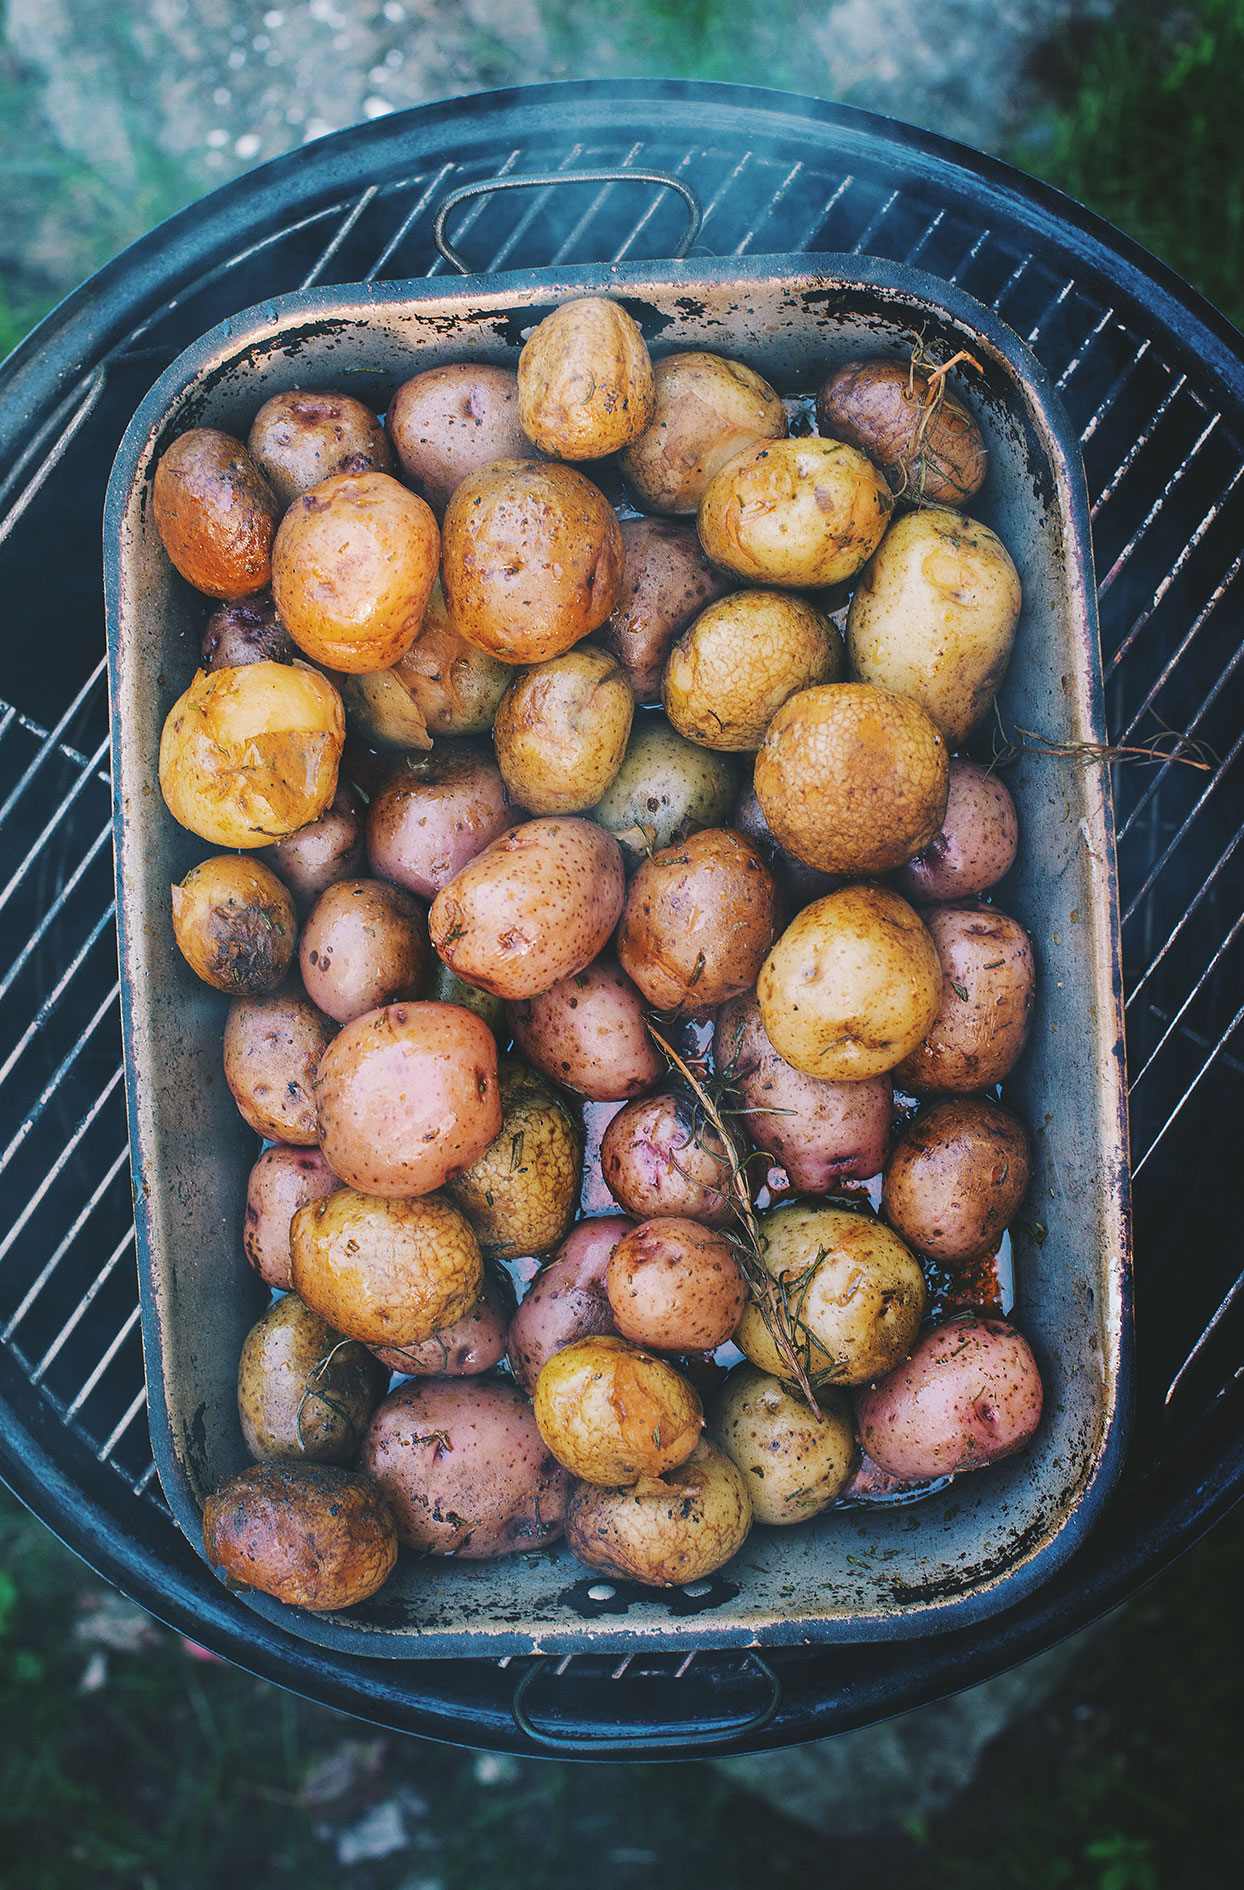 Smoked potatoes with maple and rosemary